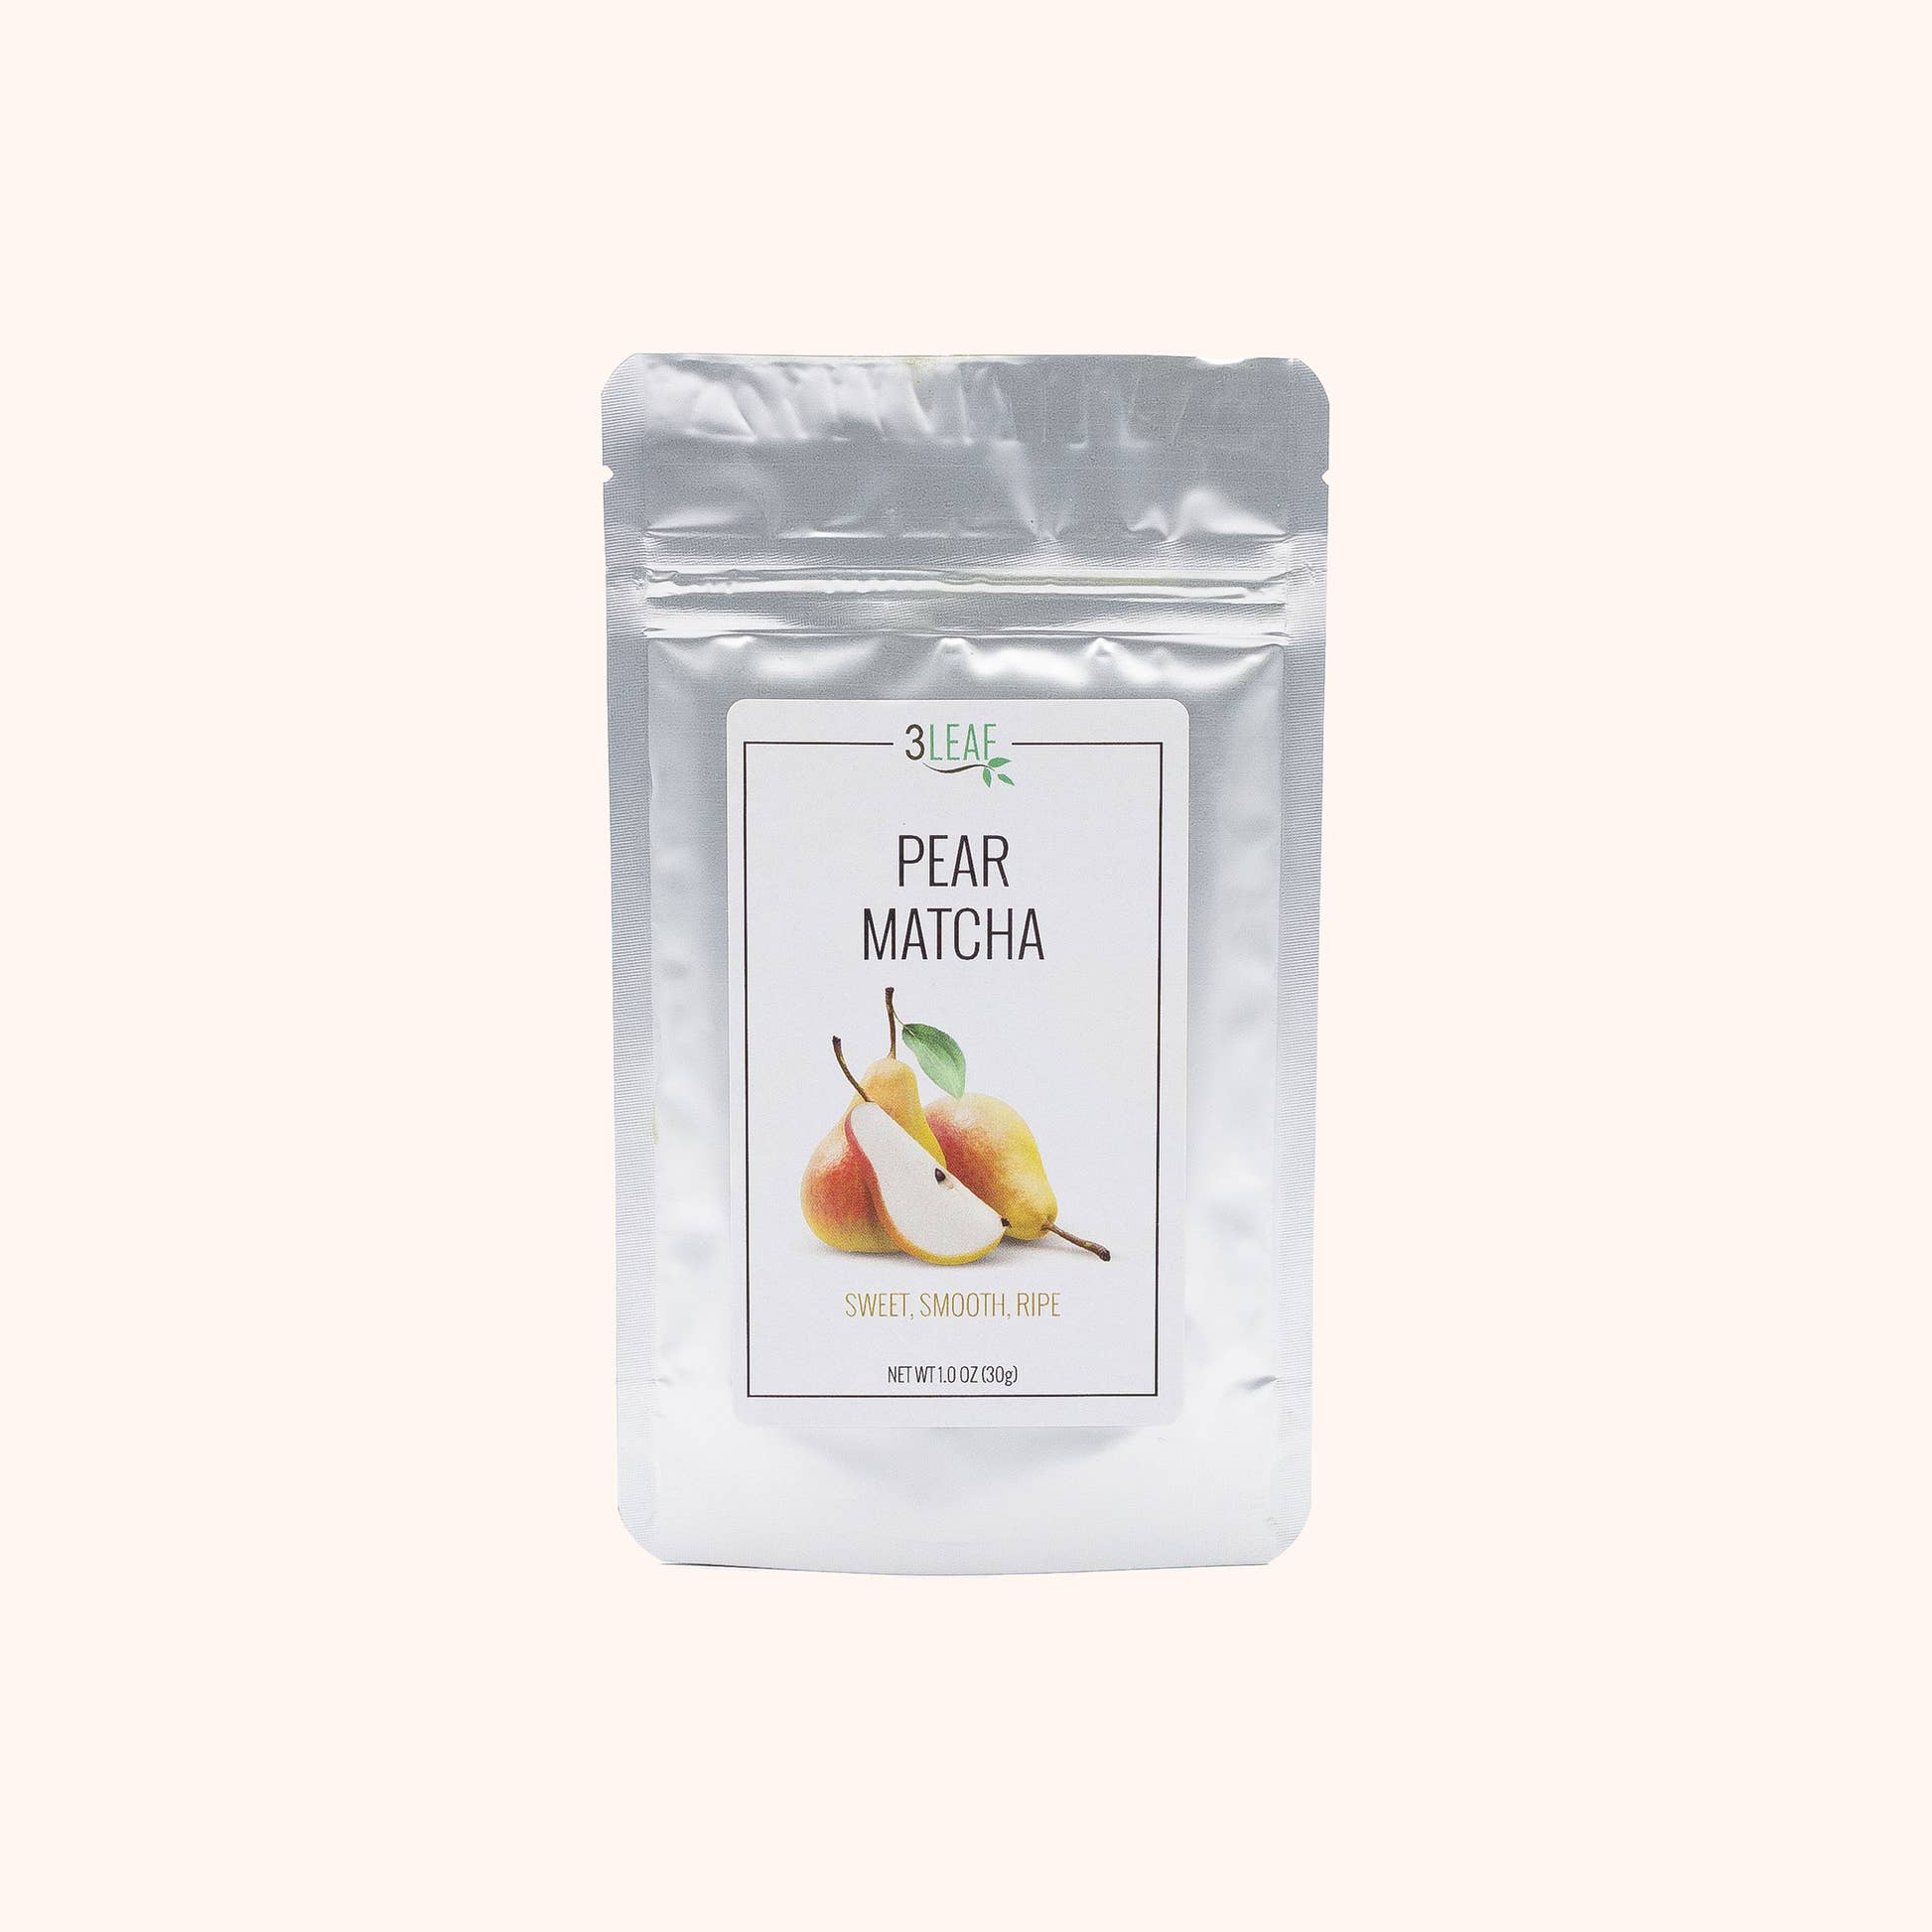 Pear Matcha by 3 Leaf Tea matcha pouch with a pear